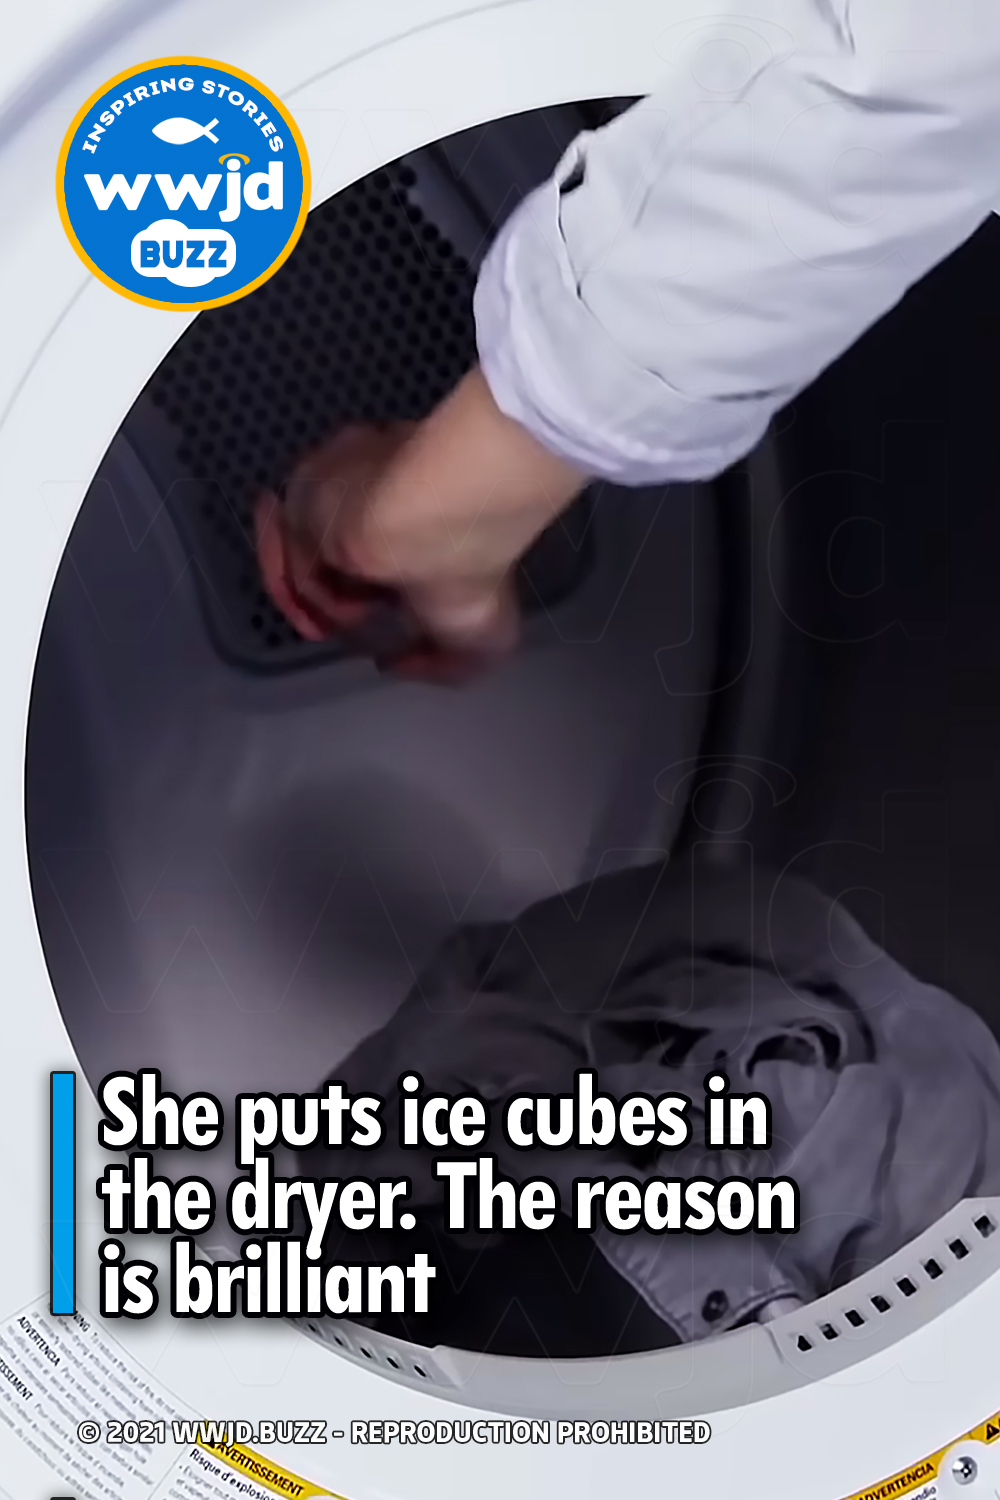 She puts ice cubes in the dryer. The reason is brilliant